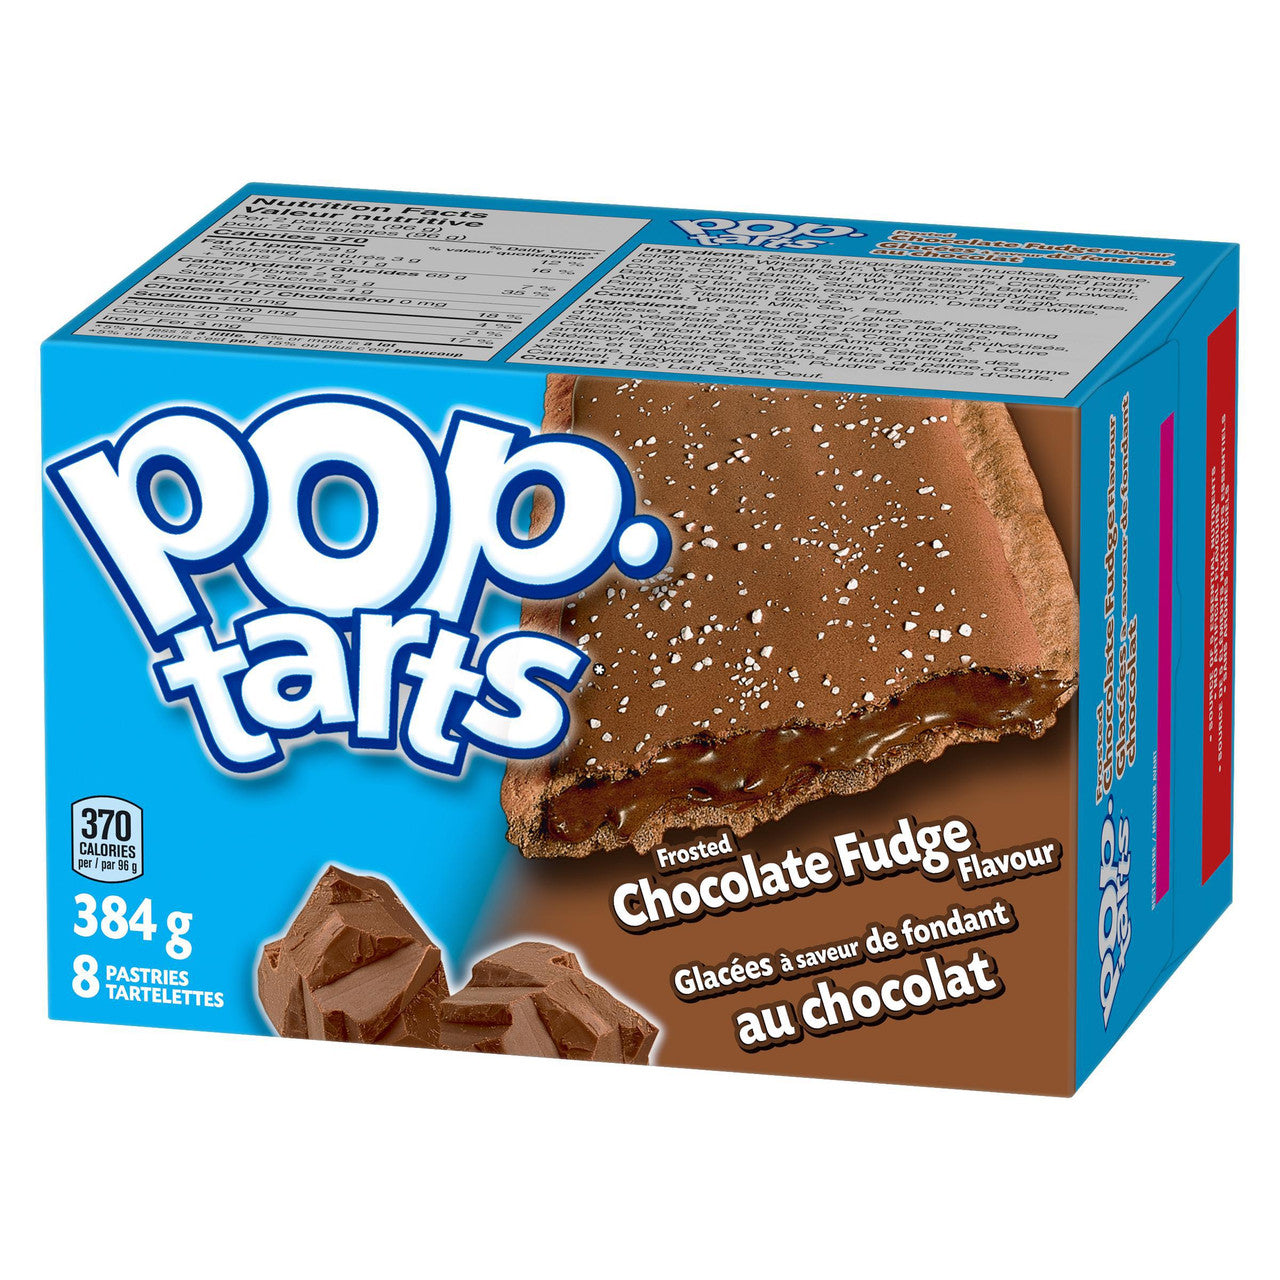 Kellogg's Pop Tarts Toaster Pastries, Frosted Chocolate Fudge 8 Pastries 400g/14.11oz (Imported from Canada)